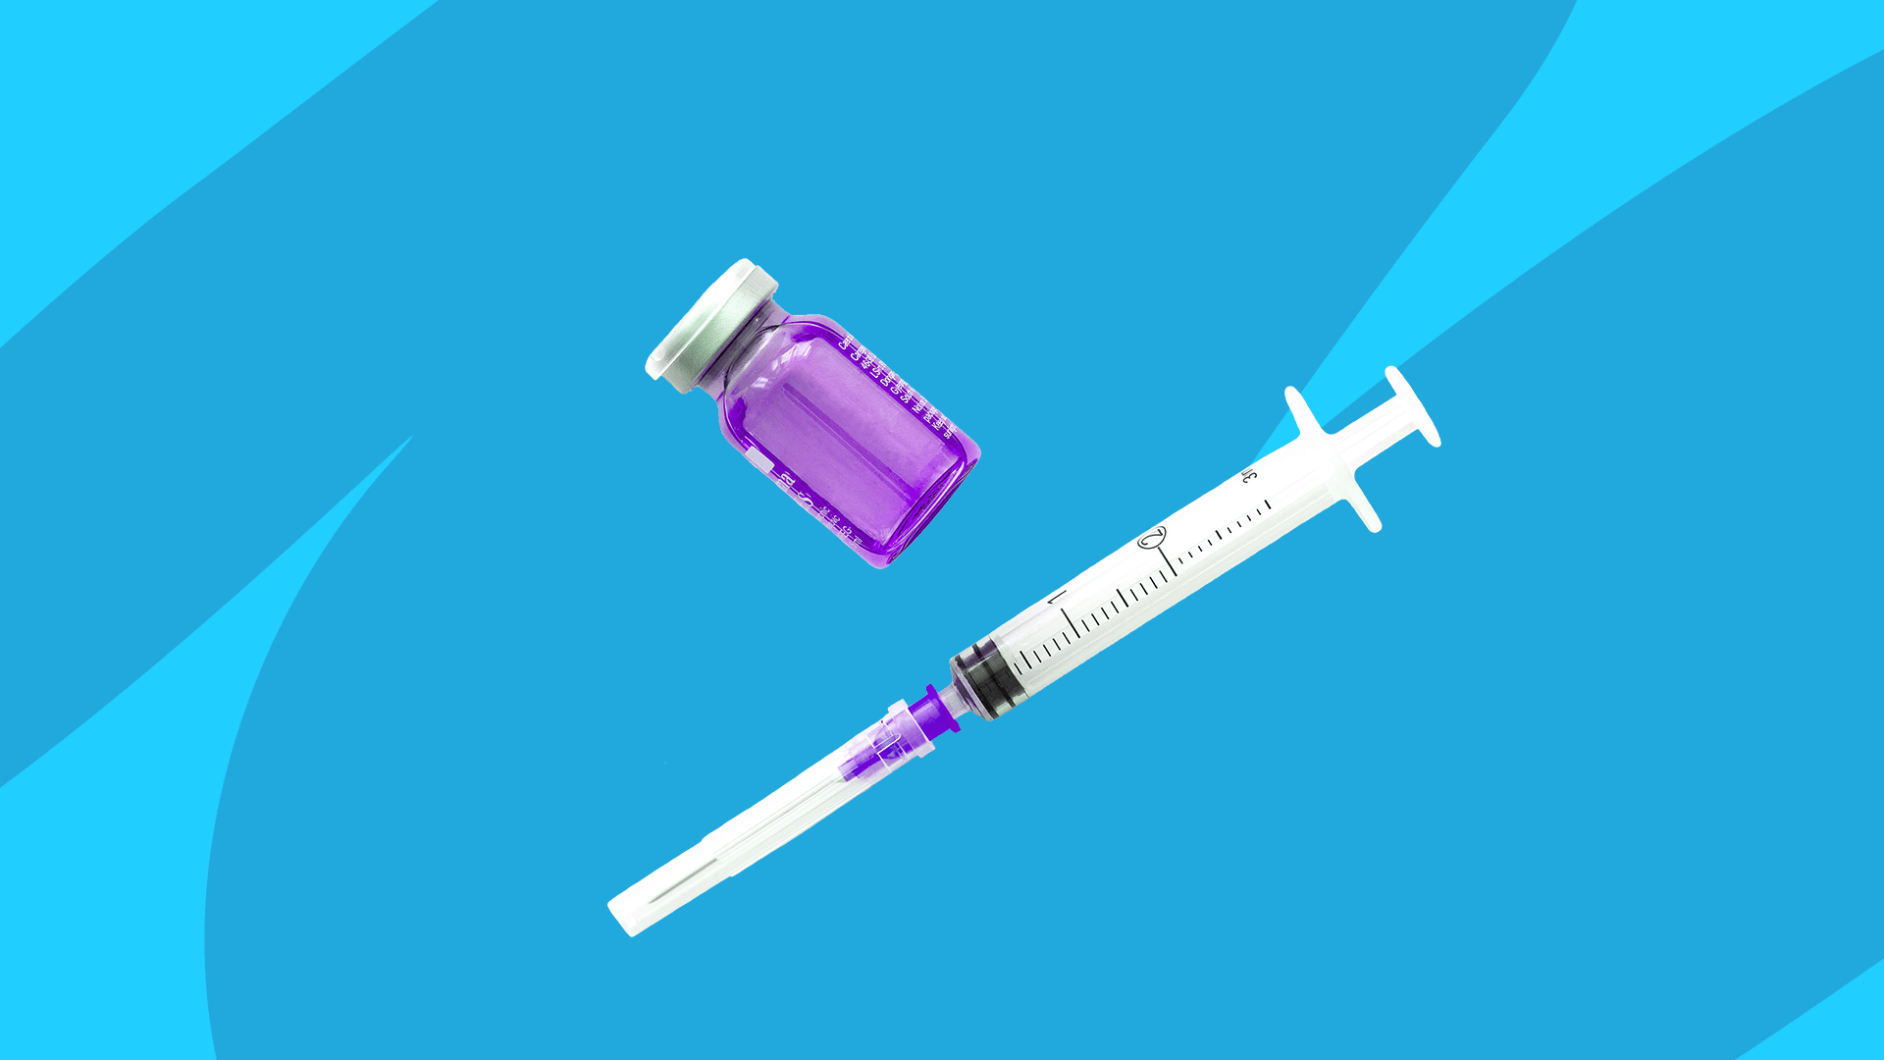 Vaccine vial and needle: How much is Shingrix without insurance